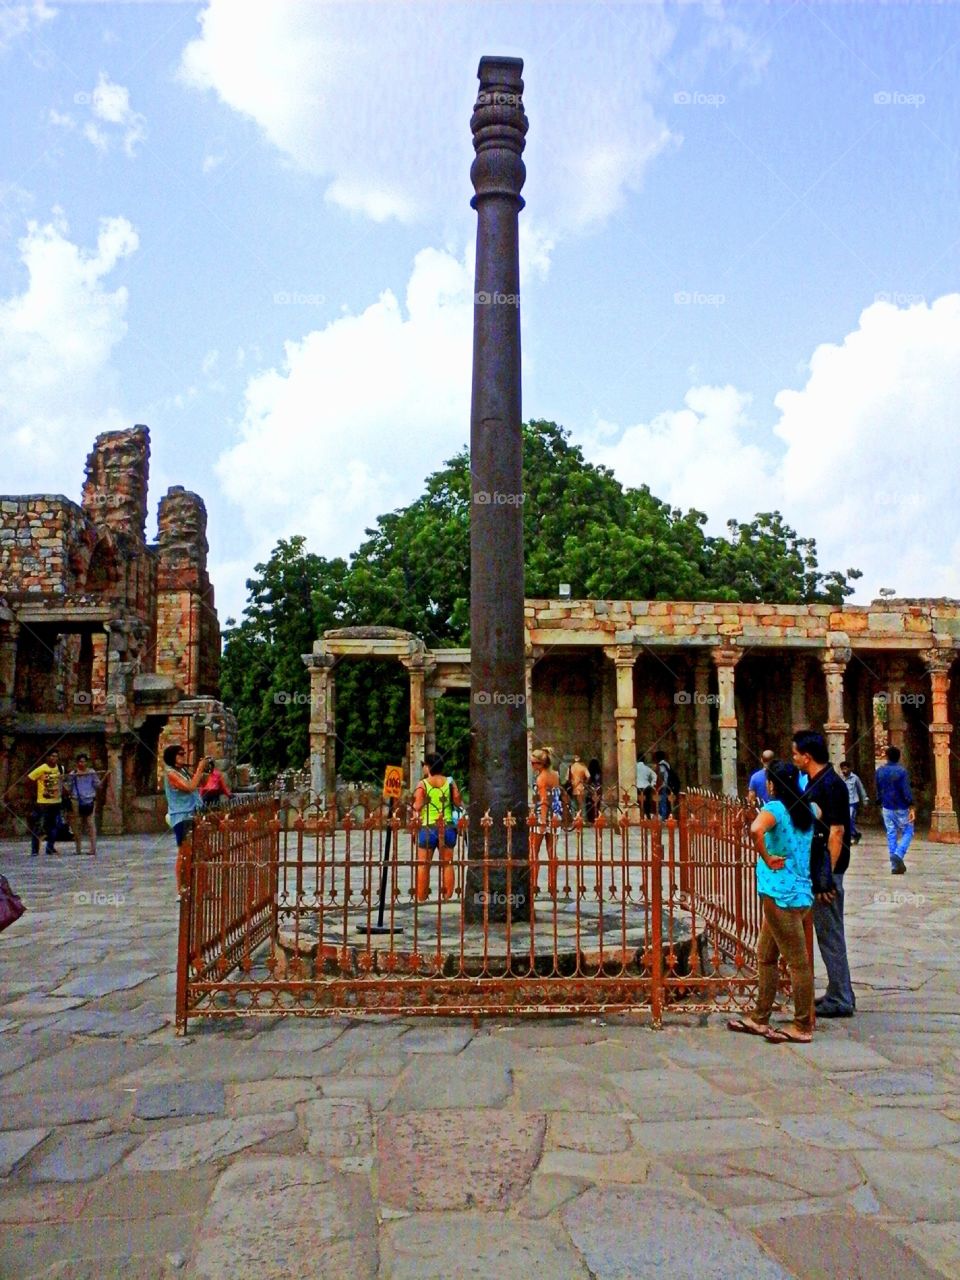 The iron pillar of Qutub Minar in Delhi is nearly 24 feet tall and weighs 6 tons. This pillar is made of wrought iron. Recent studies into the structure have revealed that the pillar was crafted with the use of forge welding. Though a marvelous structure but it is well known for an ancient mystery. The pillar stands in the Quwwat-ul Mosque and was constructed in 1192. It stands among many ruins found in the area. The mosque is an testimony of Islamic India. But the pillar is much ancient then the other structures surrounding it. But onlookers will not be able to guess its age. Though the iron pillar was forged about 1600 years ago and moved to Delhi nearly 1000 years ago (even the mosque was built). Though such a pillar should have fallen to dust due to erosion and rust but till date the pillar stands tall. Though some of the other pillars in the locality are found in a dilapidated condition this is not the case with the Iron Pillar of Qutub Minar.